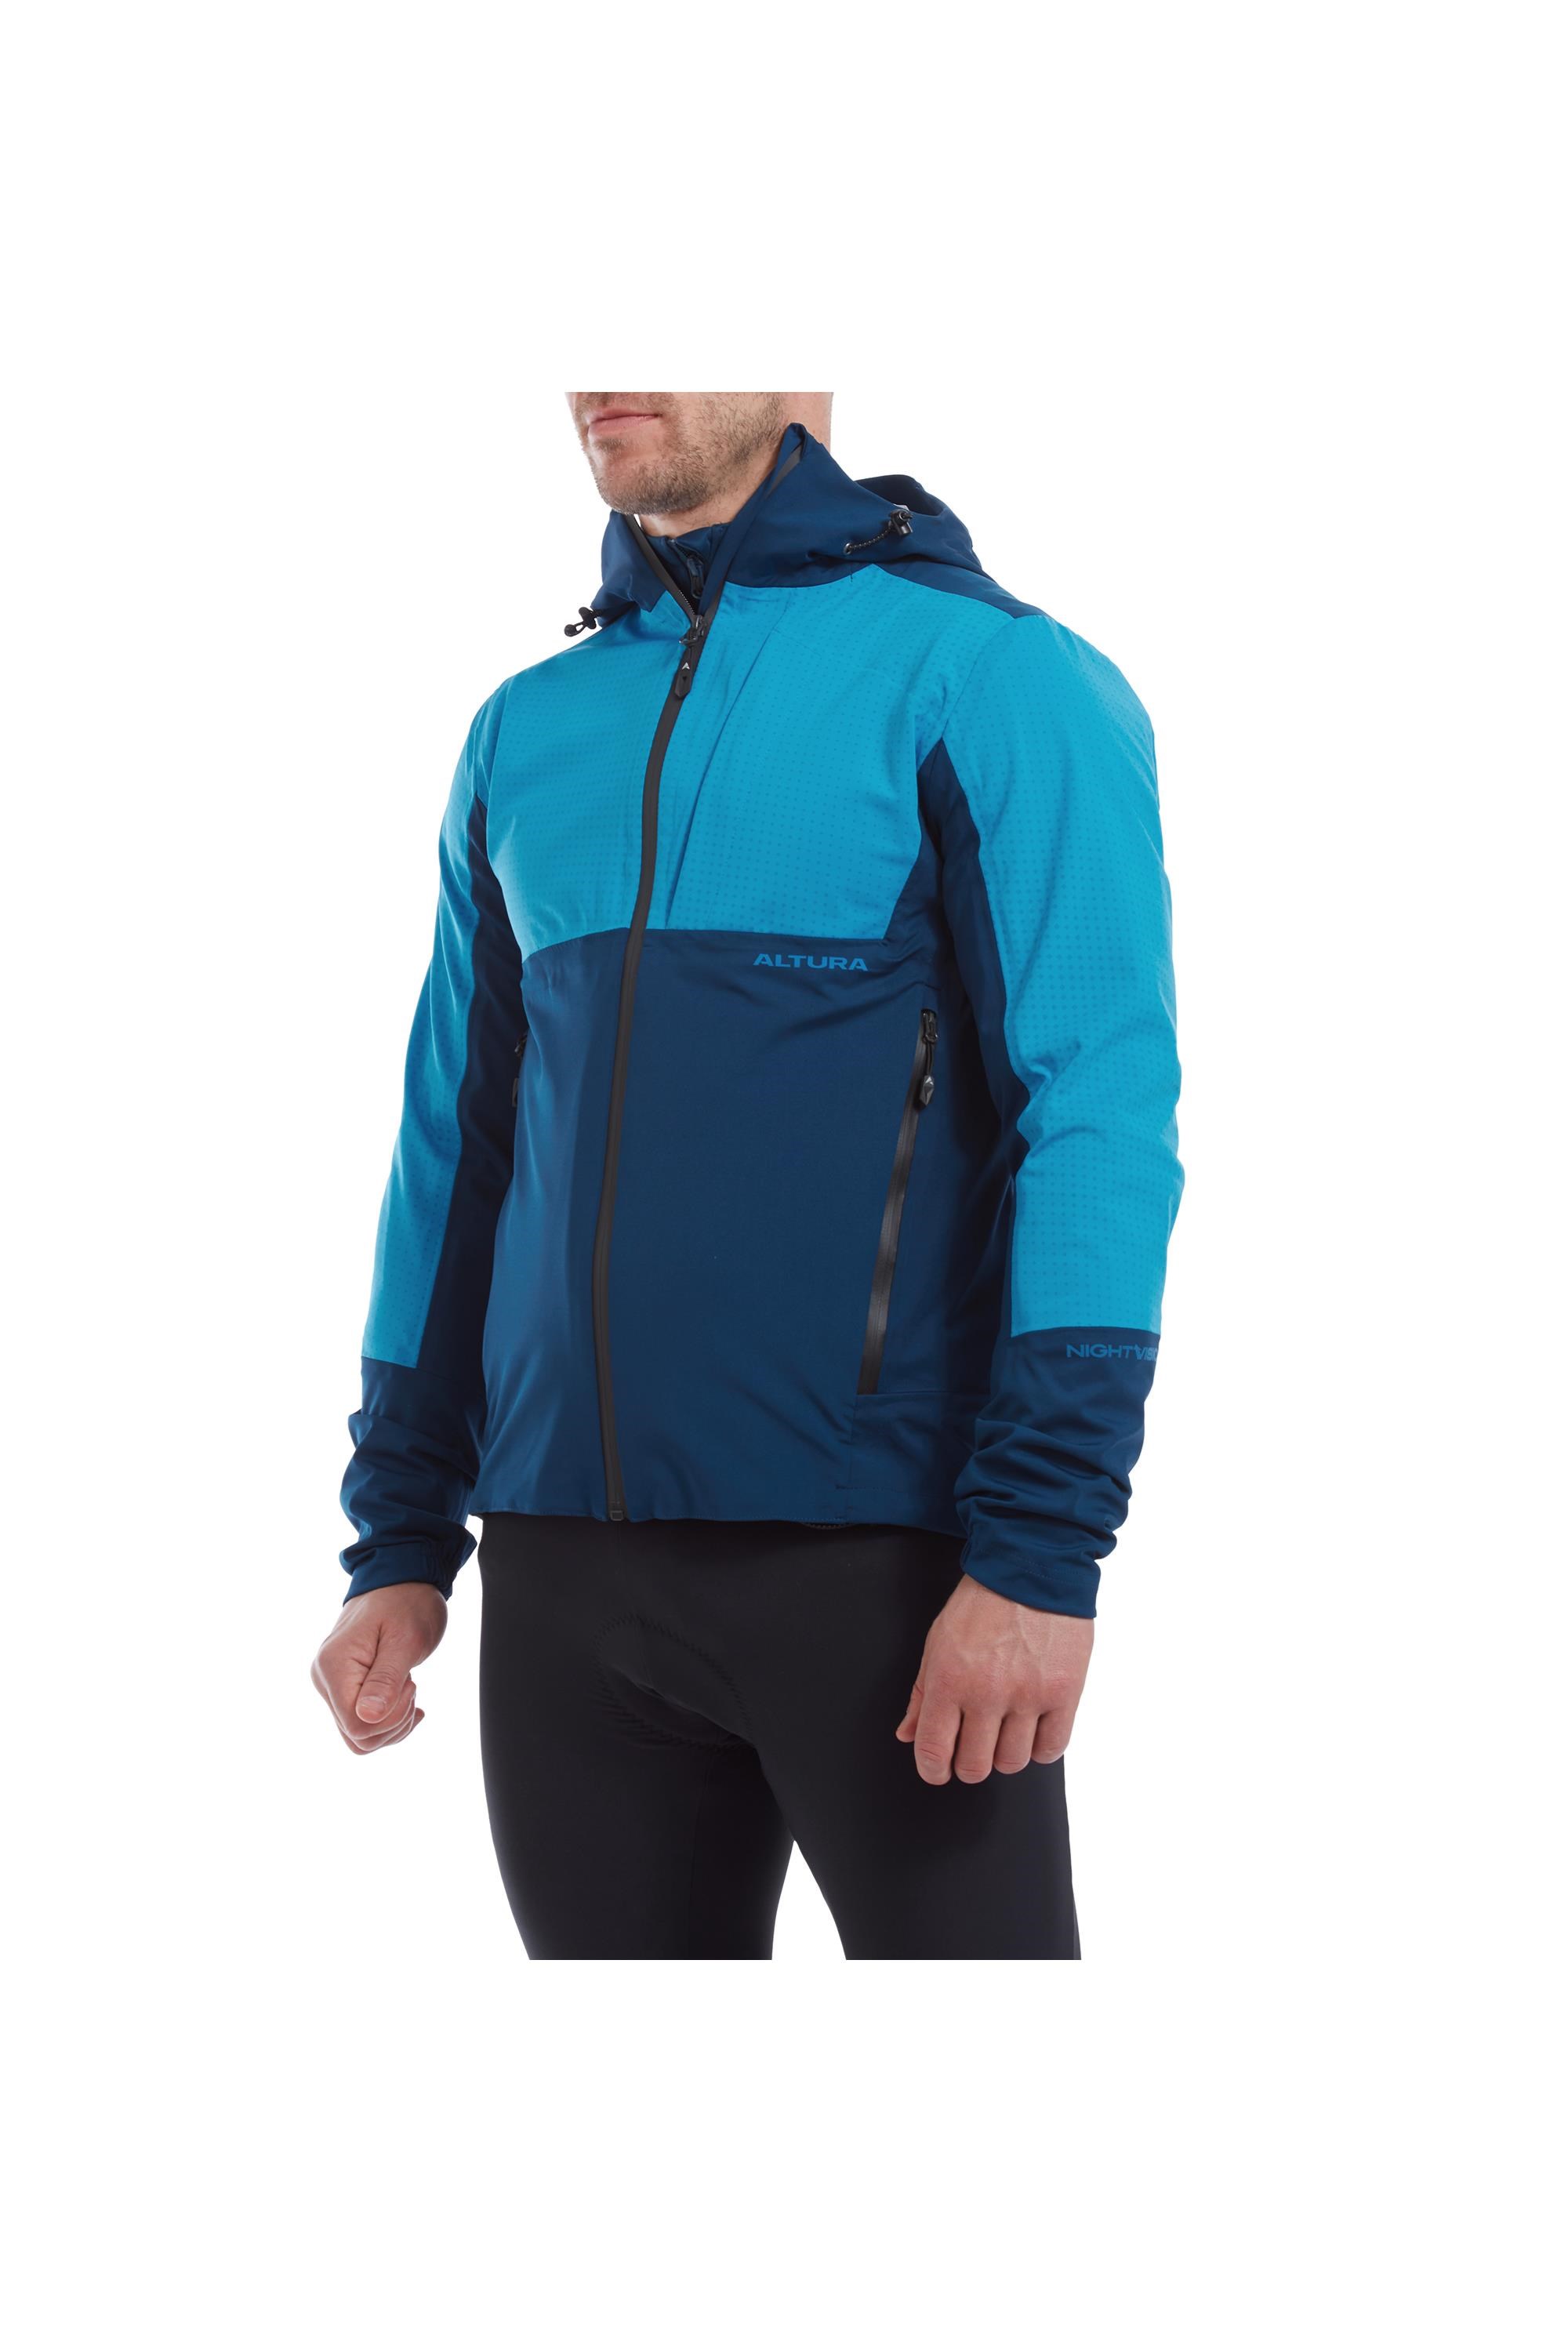 Nightvision Zephyr Men's Thermal Cycling Jacket – Altura